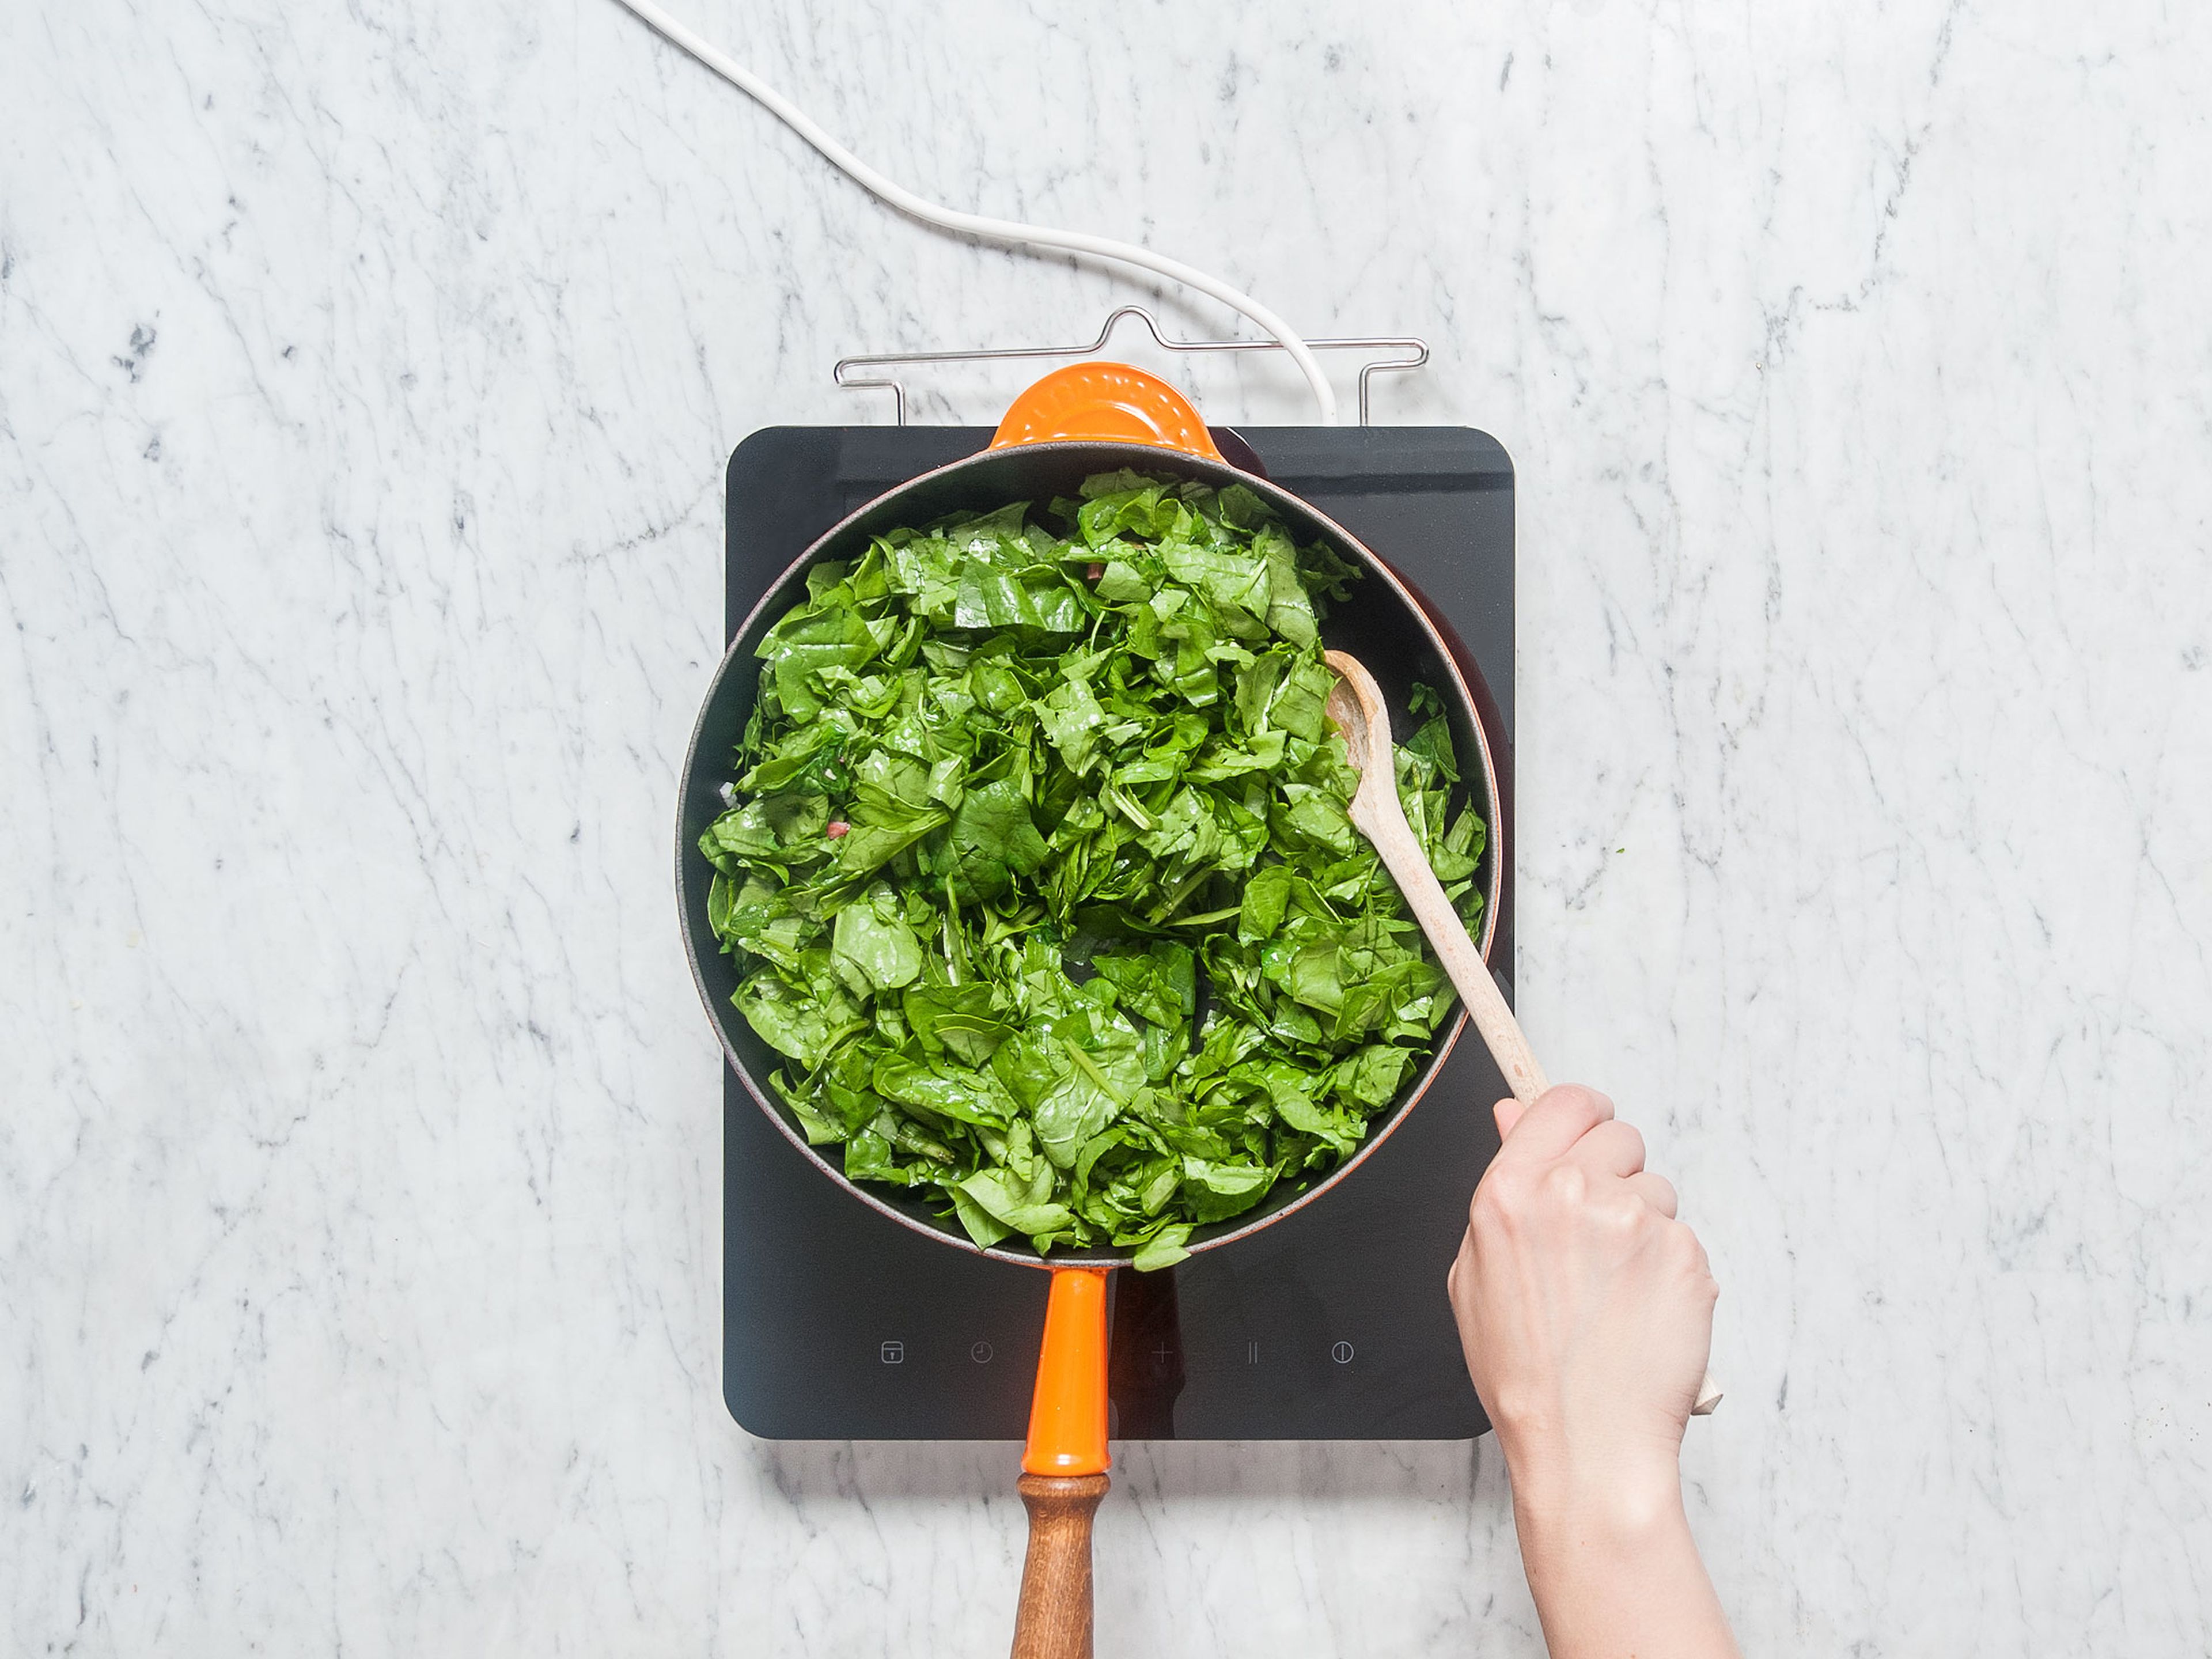 Heat olive oil in a large frying pan set over medium heat. Add diced bacon, onion, and garlic and sauté for approx. 2 – 3 min. Add green onion and spinach, season well with salt and pepper, and fry over medium heat for approx. 4 - 5 min.